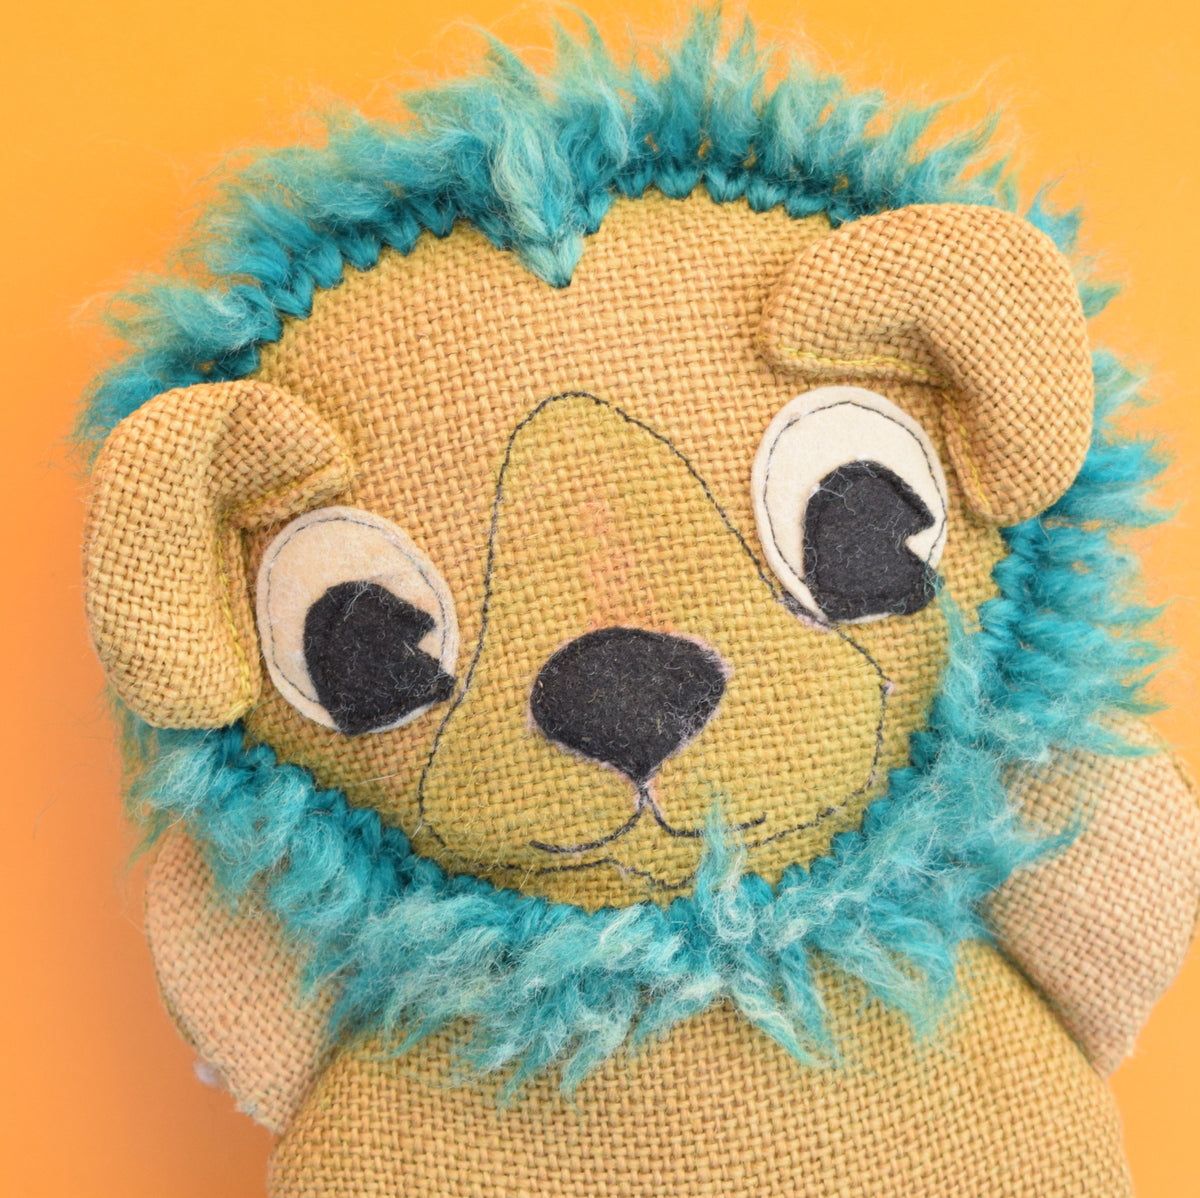 Vintage 1970s Small Hessian Lion - Character Crafts Ltd - Brown / Teal